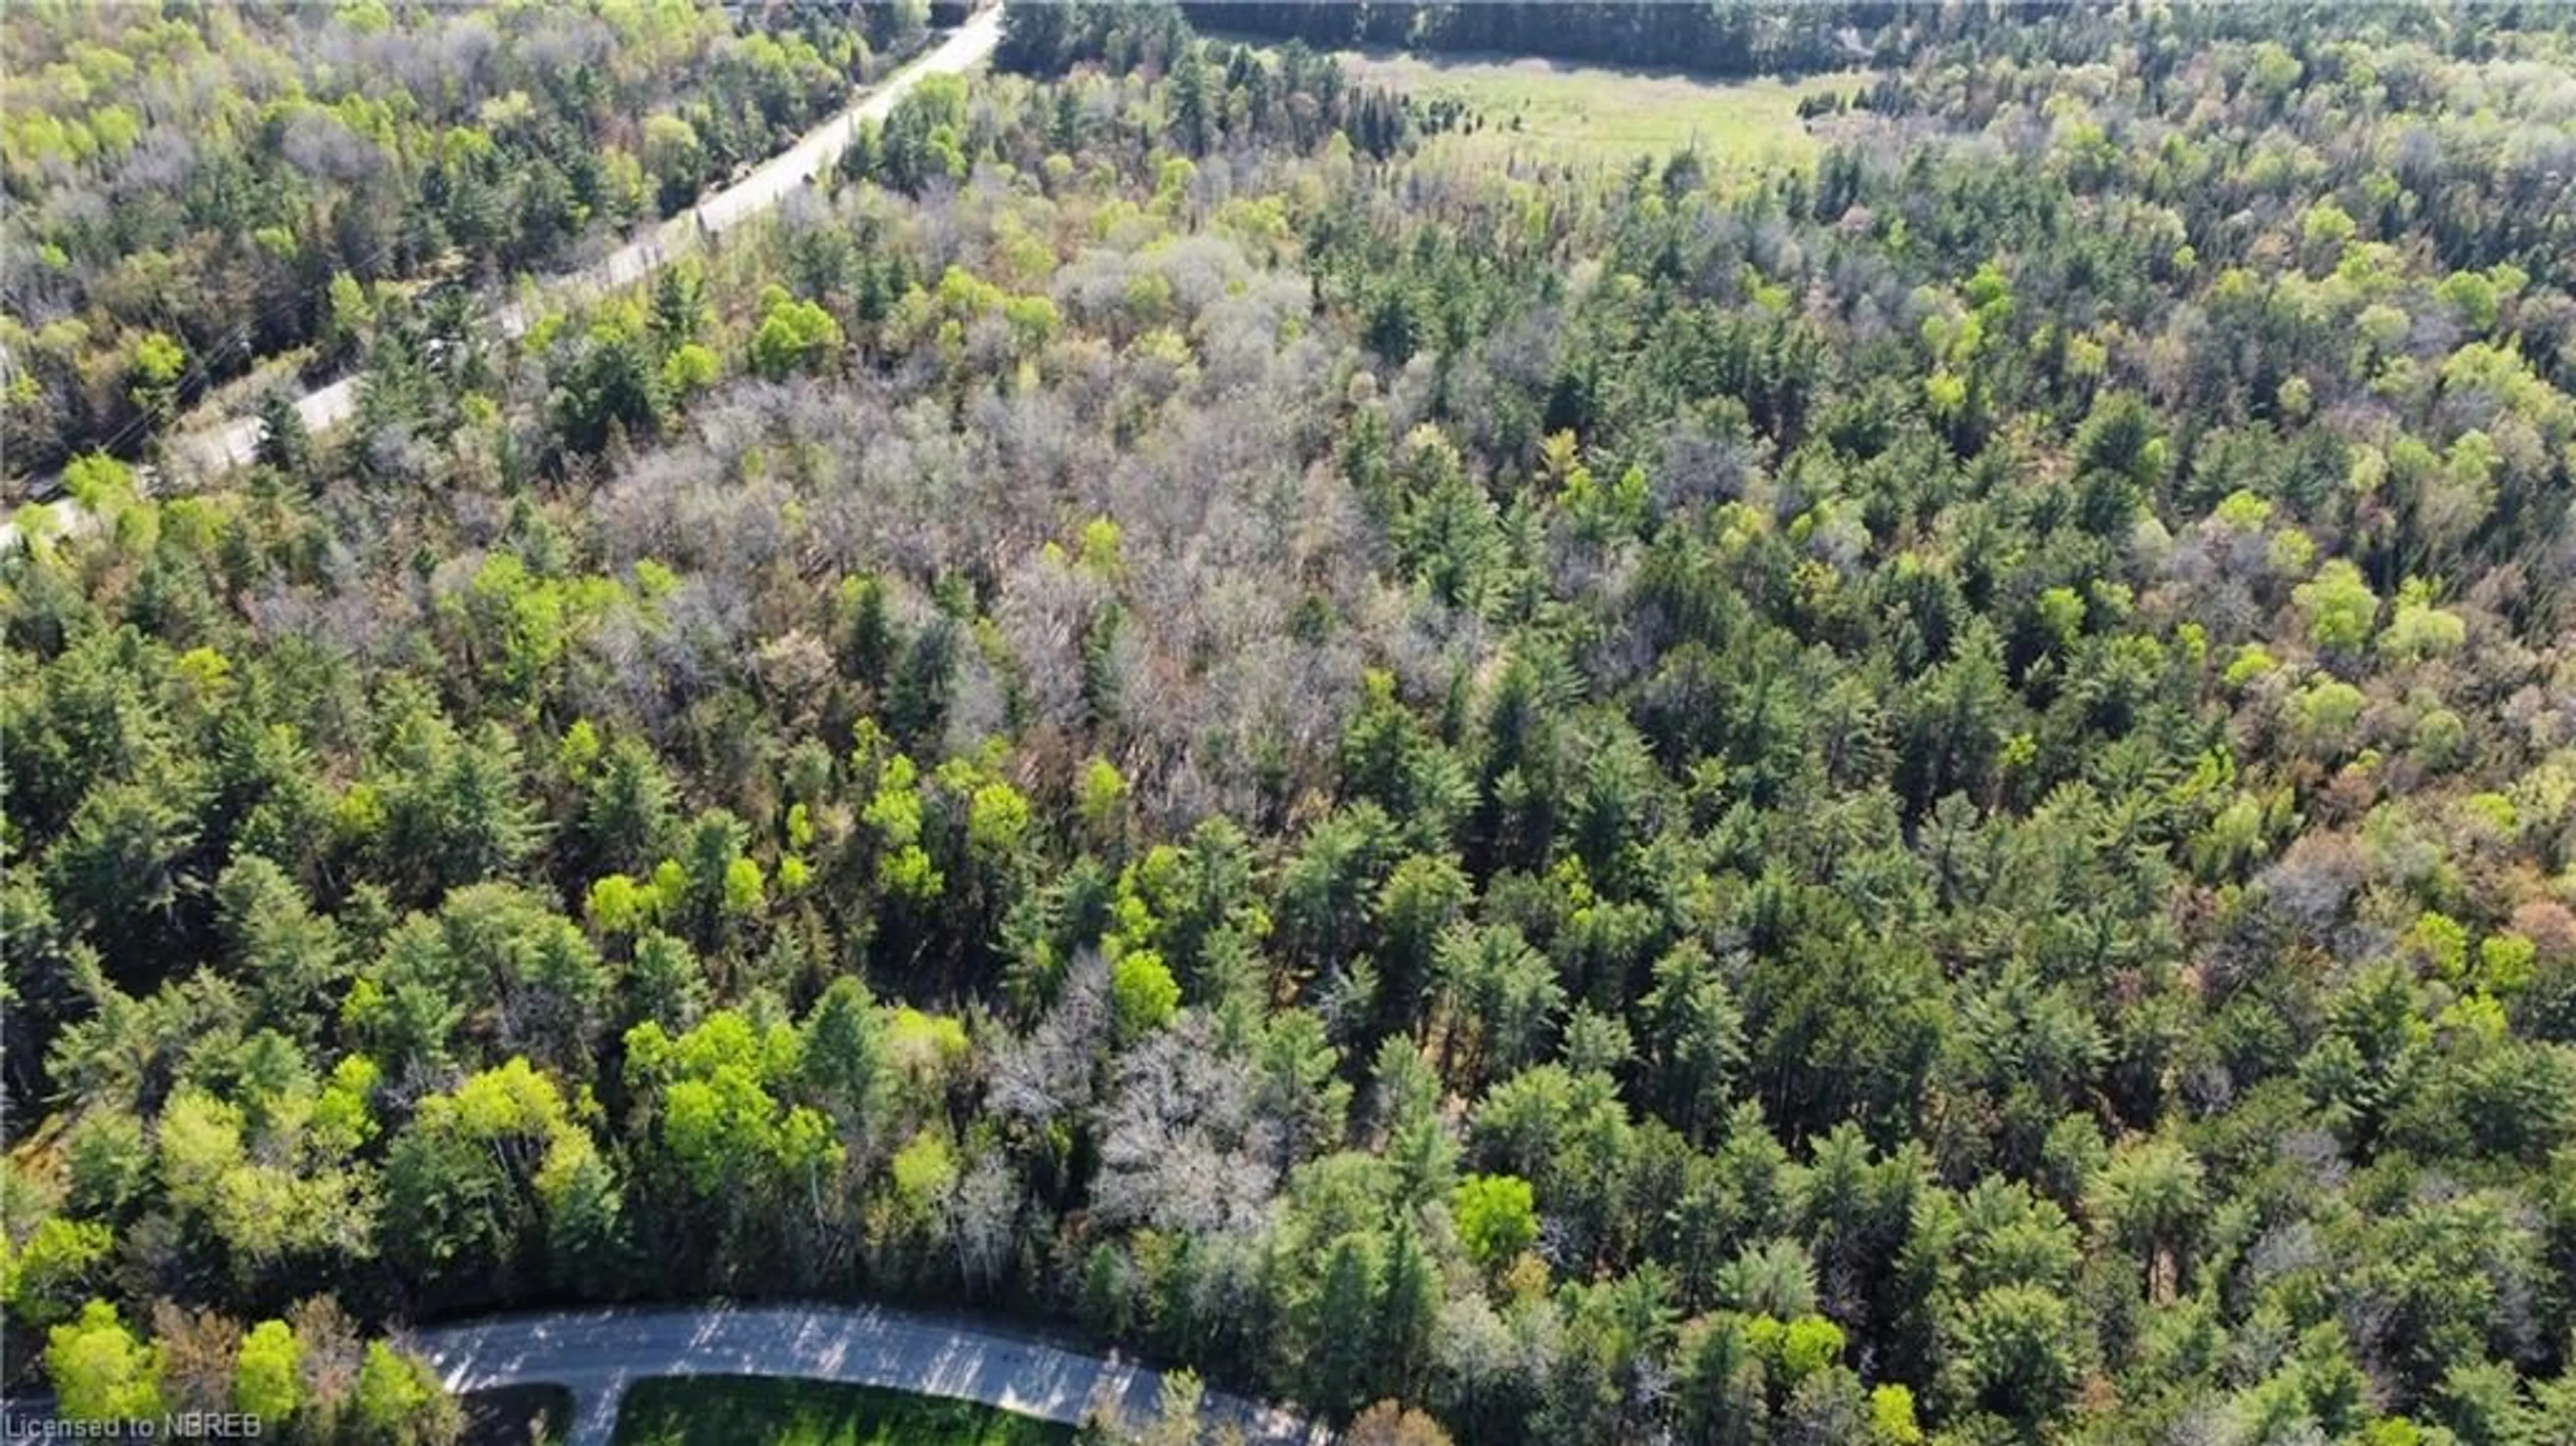 Forest view for PART 1 Lighthouse Rd, Callander Ontario P0H 1H0